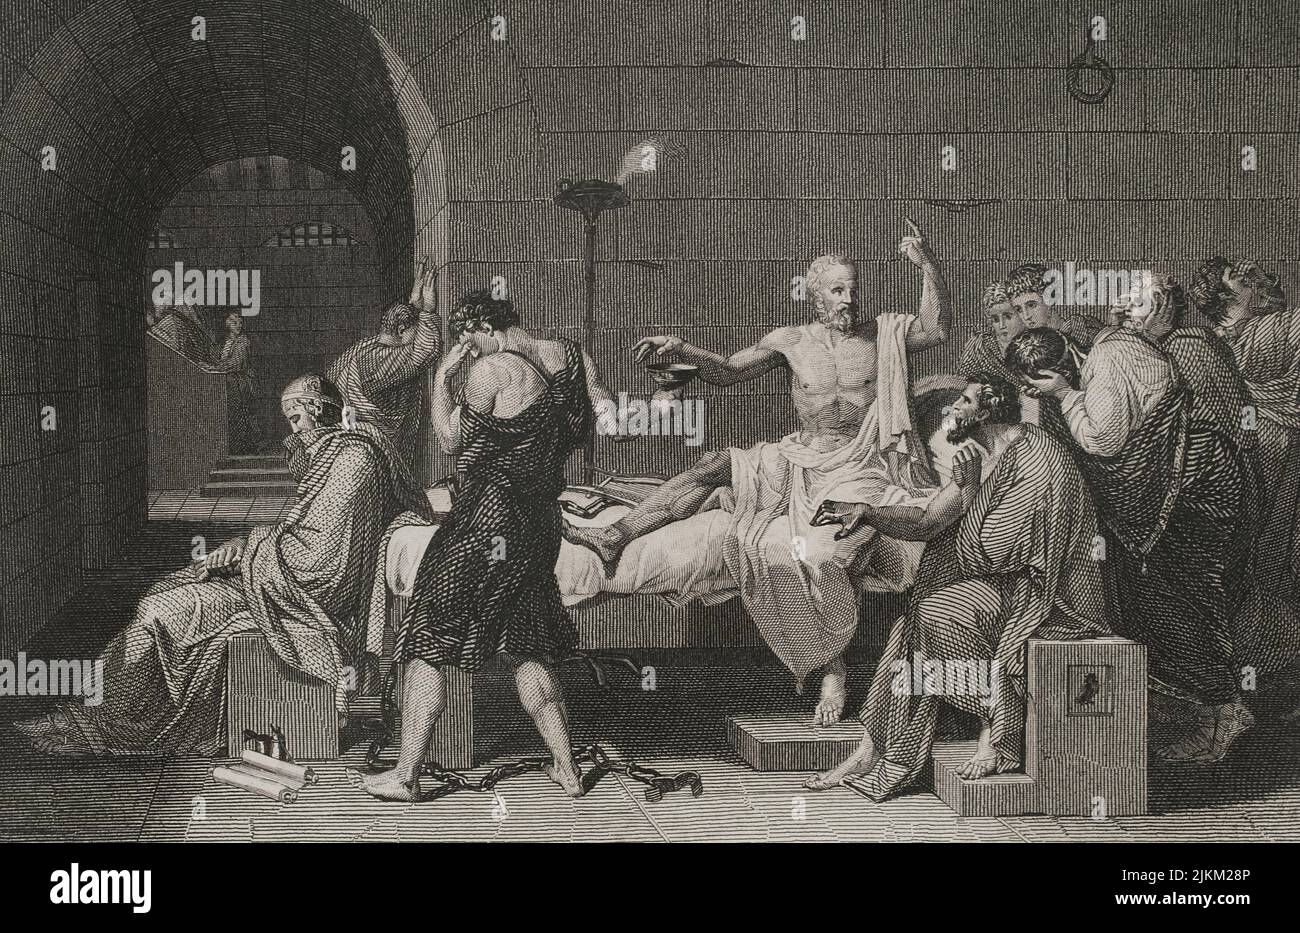 Socrates (ca. 470 BC - 399 BC). Greek philosopher. Accused of corrupting the youth, he was condemned to death by the Heliaia (Supreme Court of Ancient Athens). Death of Socrates. The scene shows Plato seated at the foot of the bed, in a meditative attitude. Engraving by A. Roca, based on the painting by Jacques-Louis David. 'Historia Universal', by César Cantú. Volume I, 1854. Stock Photo